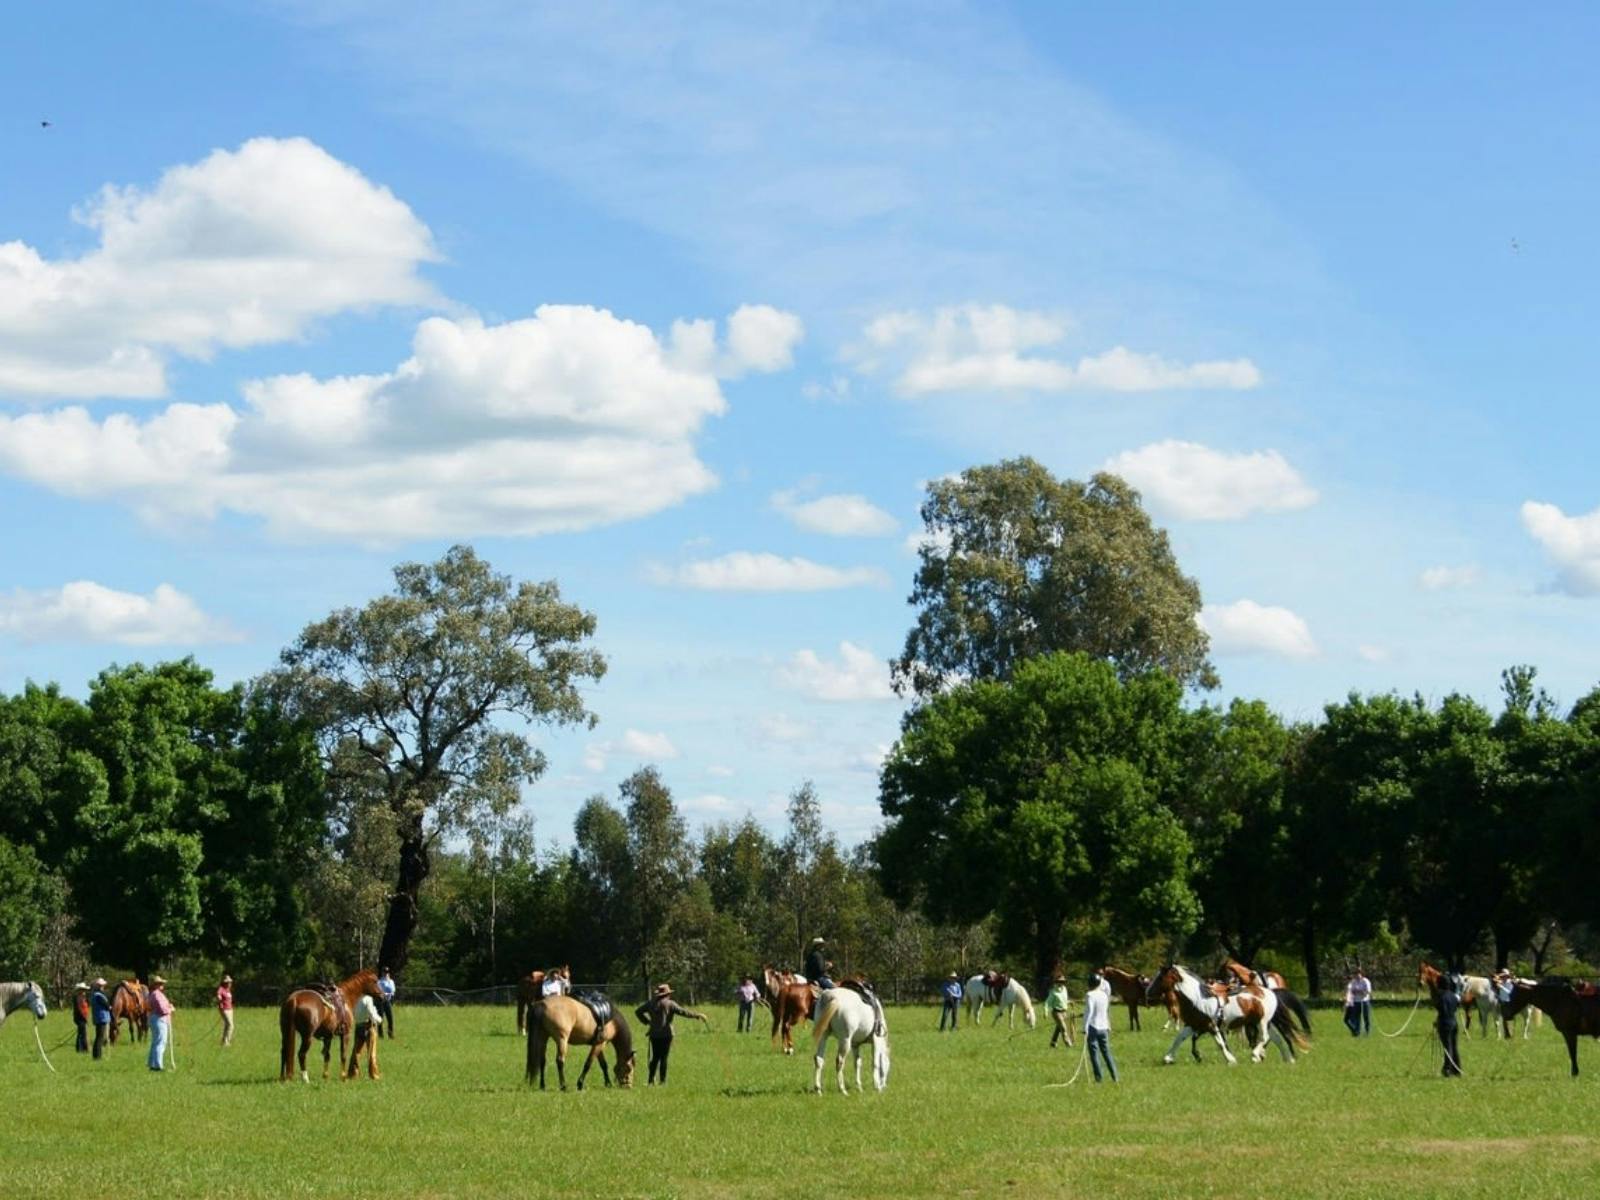 Lots of horses and riders, green grass, trees, blue sky, clouds, sunny day.